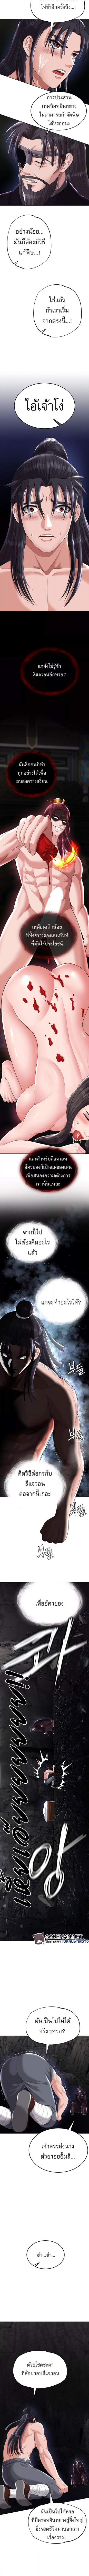 I Ended Up in the World of Murim 18 ภาพที่ 2